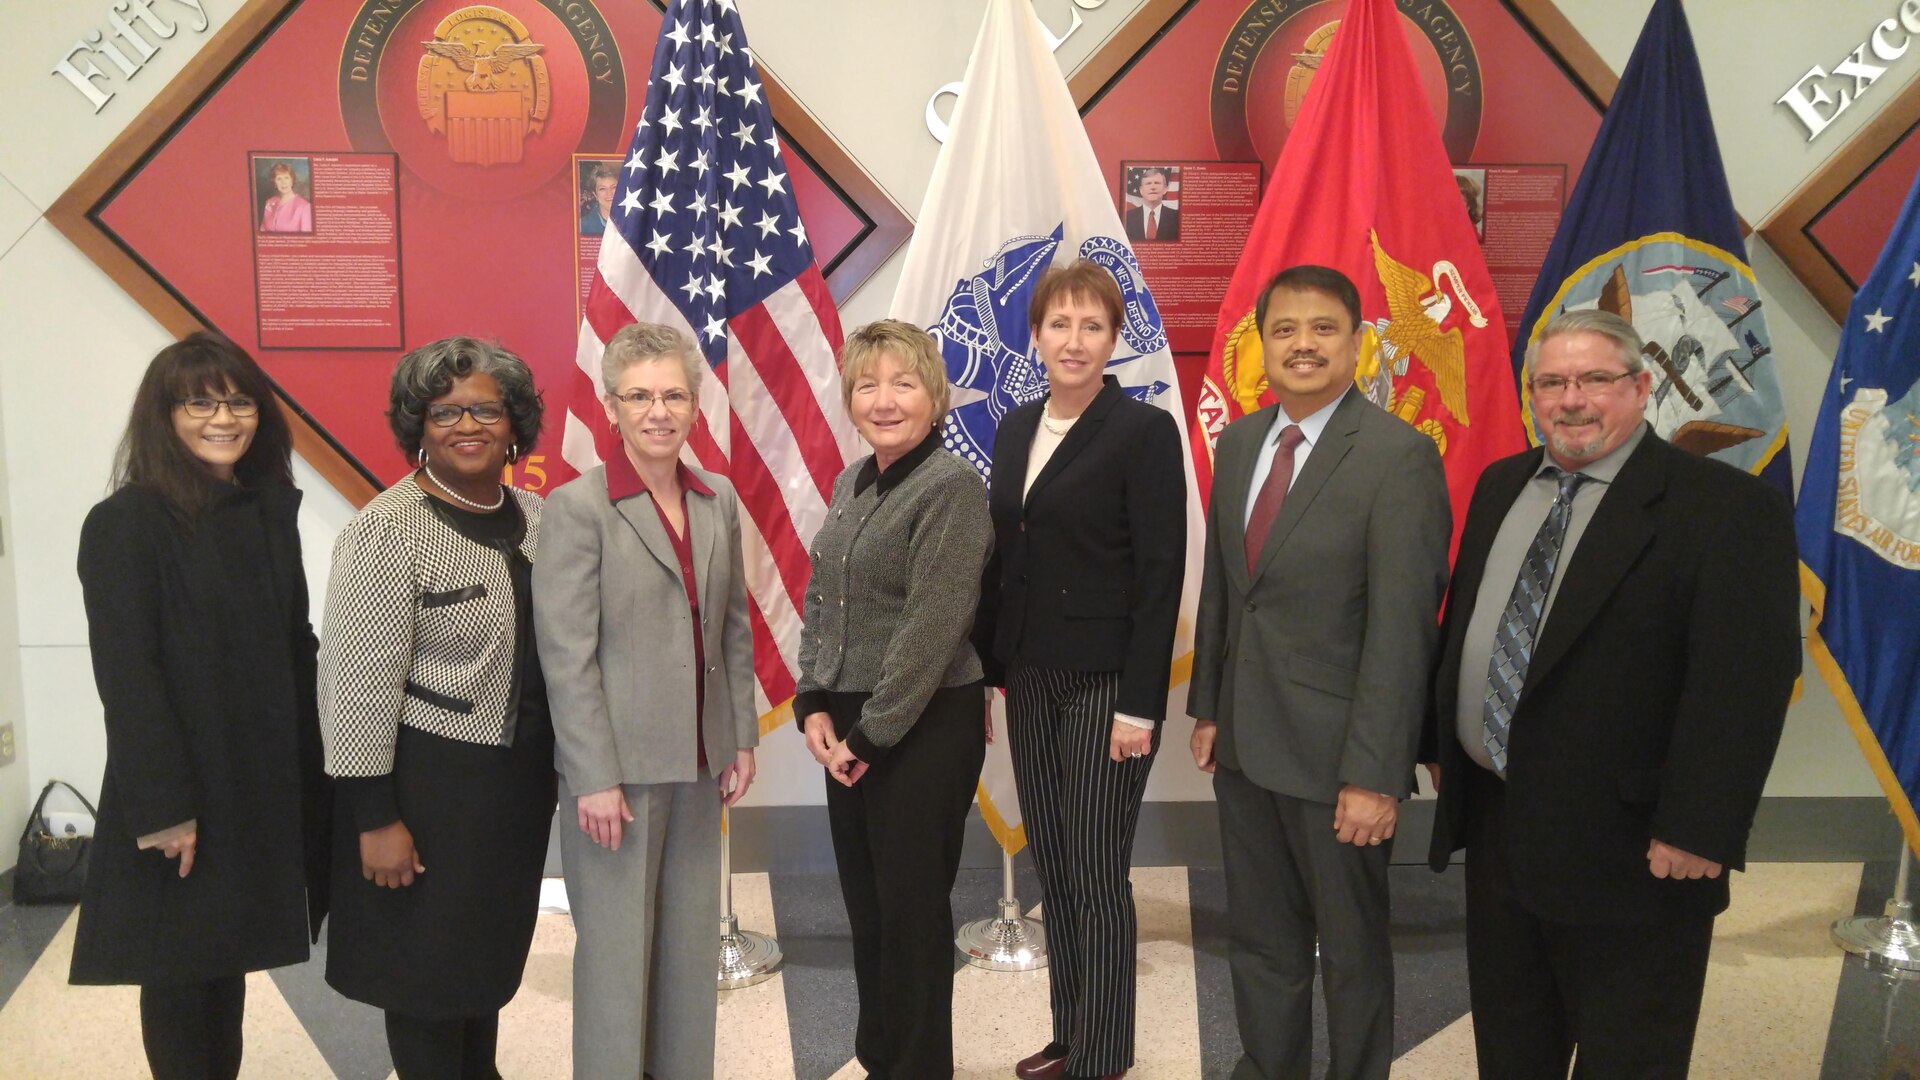 DLA Distribution deputy commander Twila Gonzales, Senior Executive Service, third from left, poses with the DLA Distribution honorees at the 49th annual employee recognition ceremony Dec. 15. From left to right are Rowena Gadin, Sandra Stephens, Gonzales, Barbara Eberly, Cathy Hampton, Jose Acosta and Kevin Henderson. 